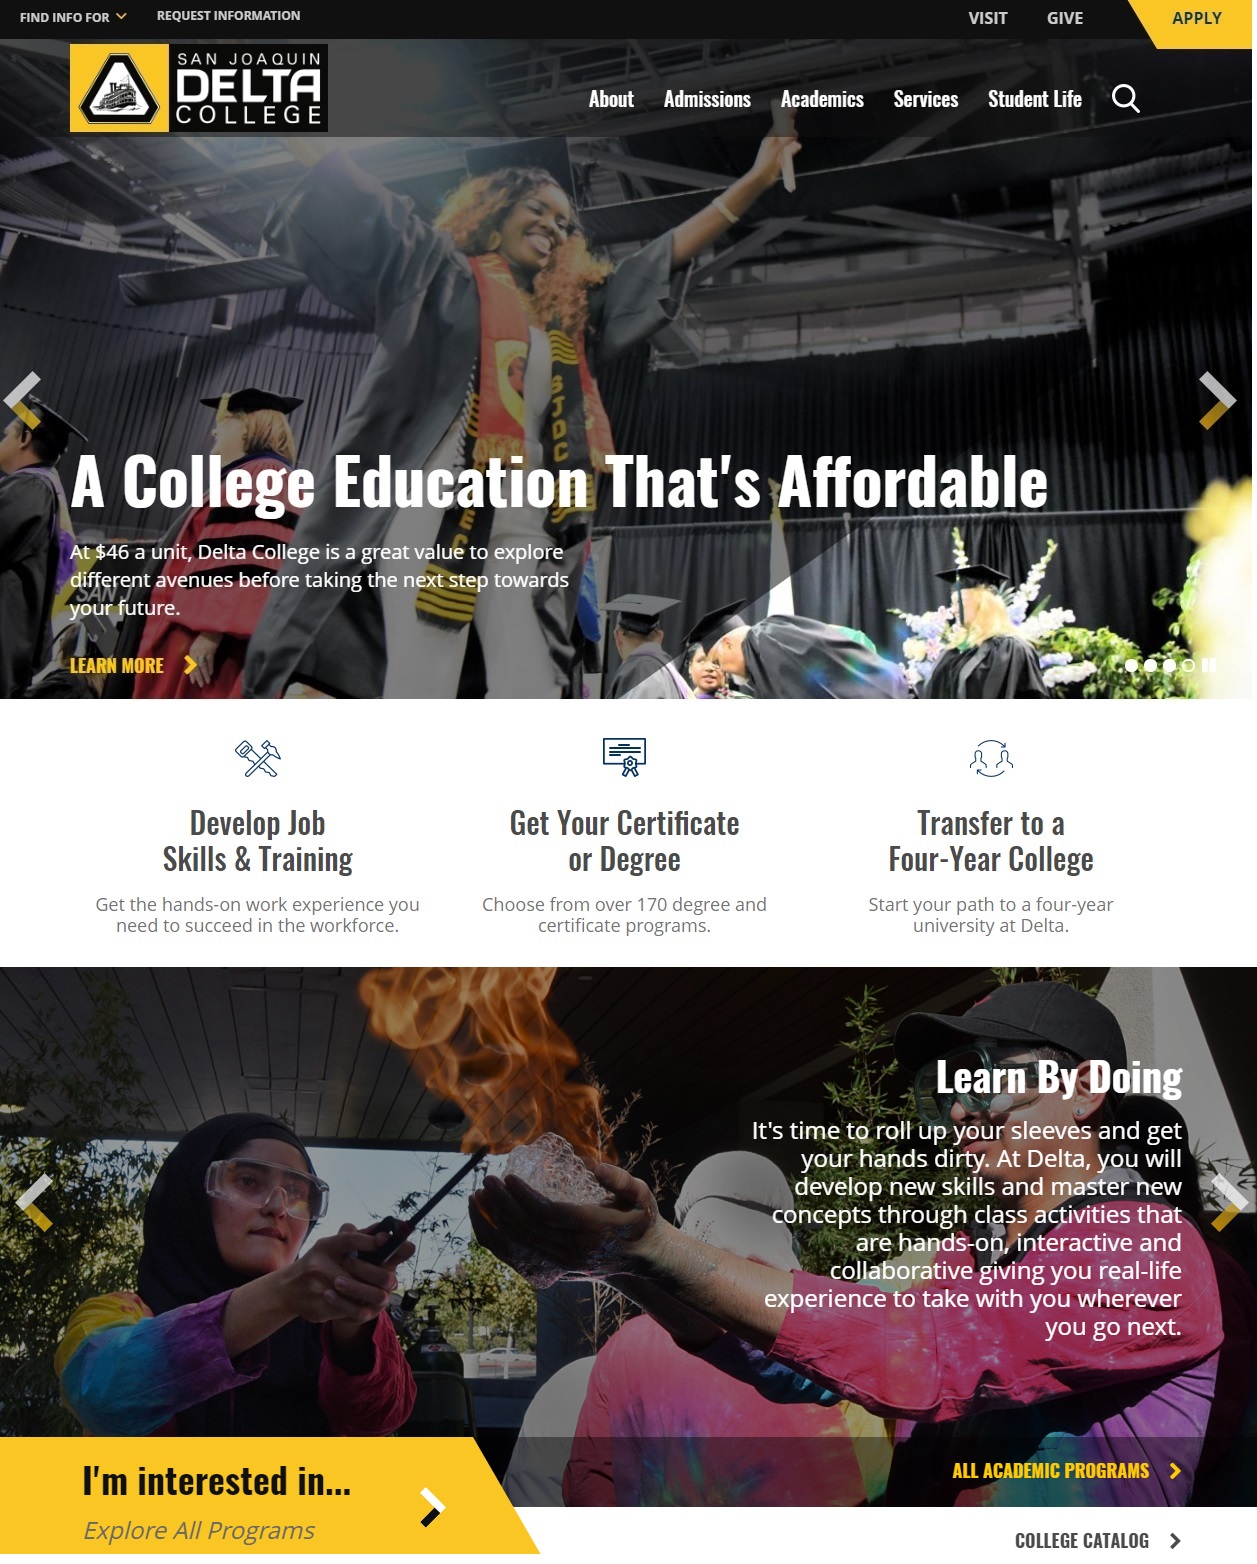 San Joaquin Delta College has launched a new website at www.deltacollege.edu